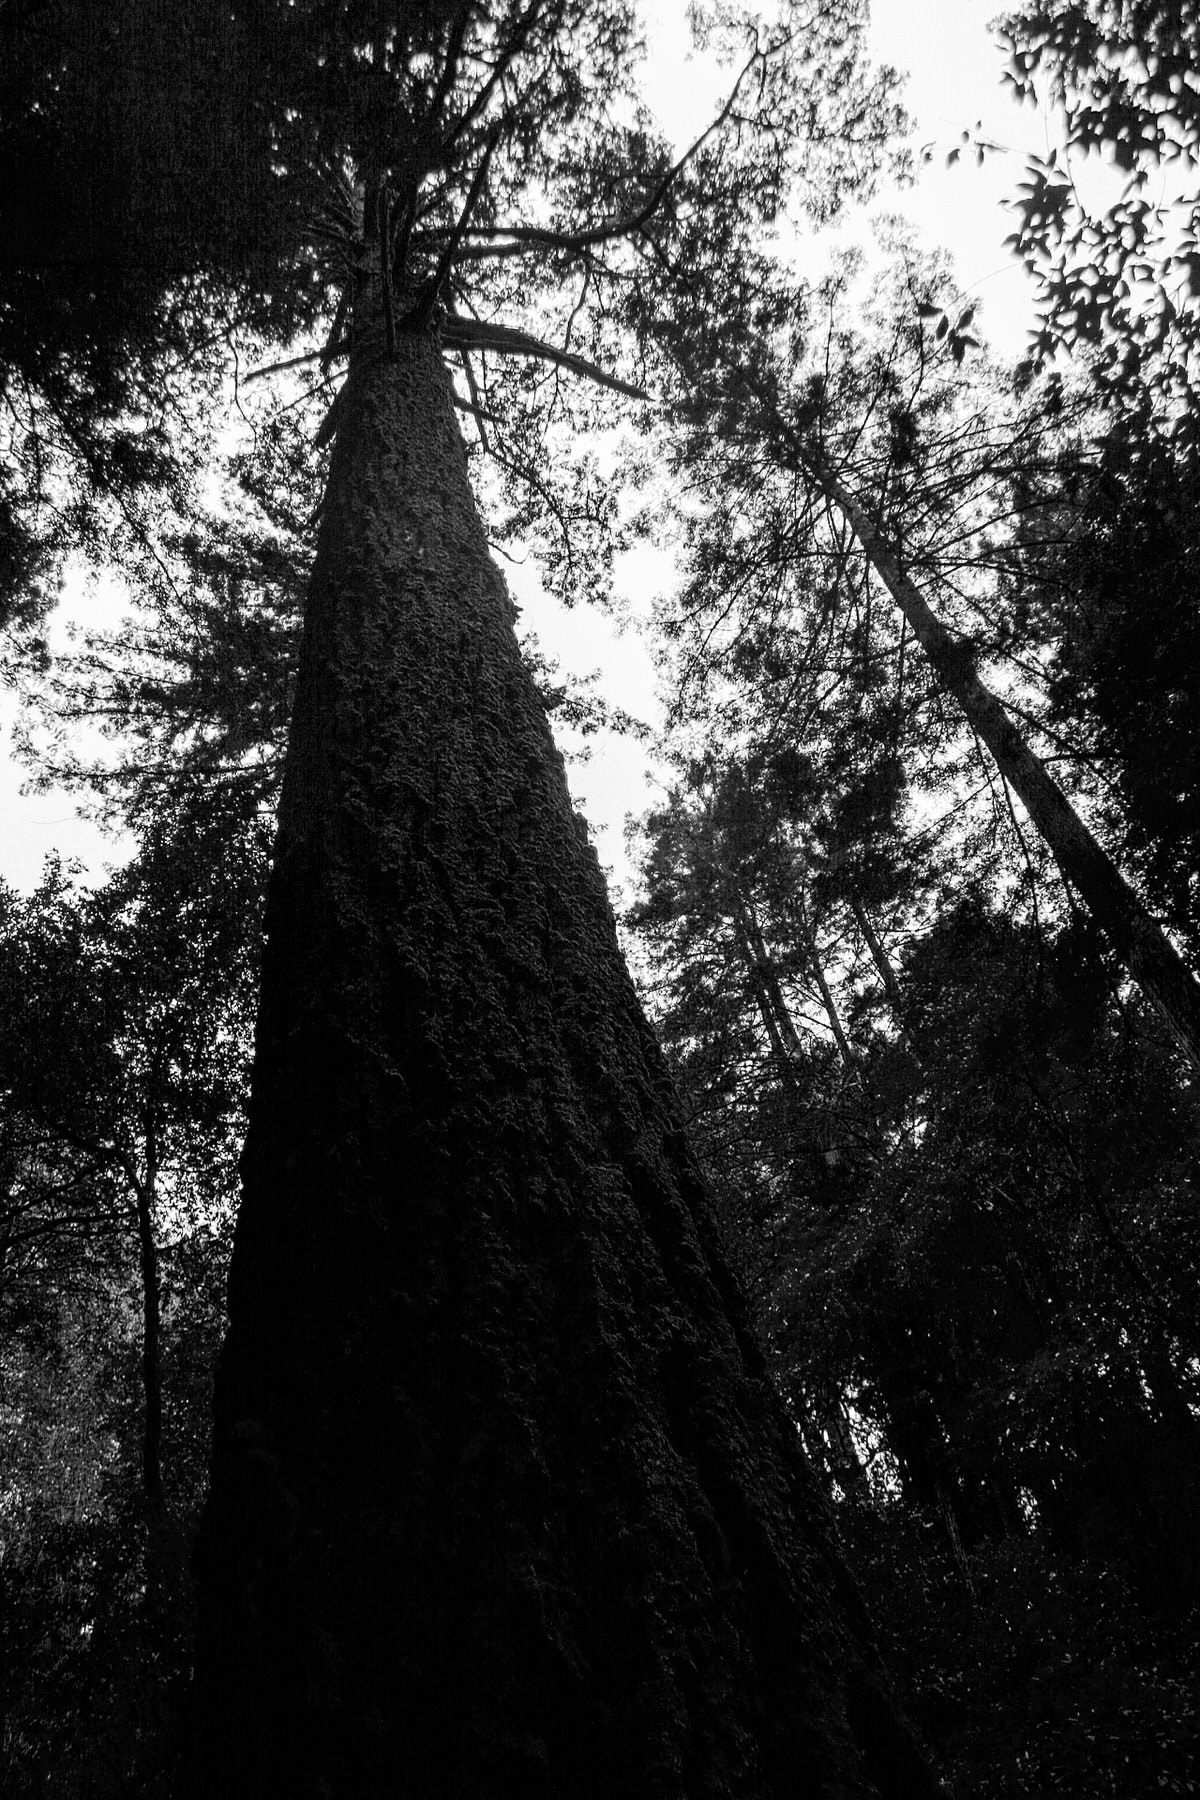 Muir-Woods-National-Monument-California-black-and-white-fine-art-photography-by-Studio-L-photographer-Laura-Schneider-_3582